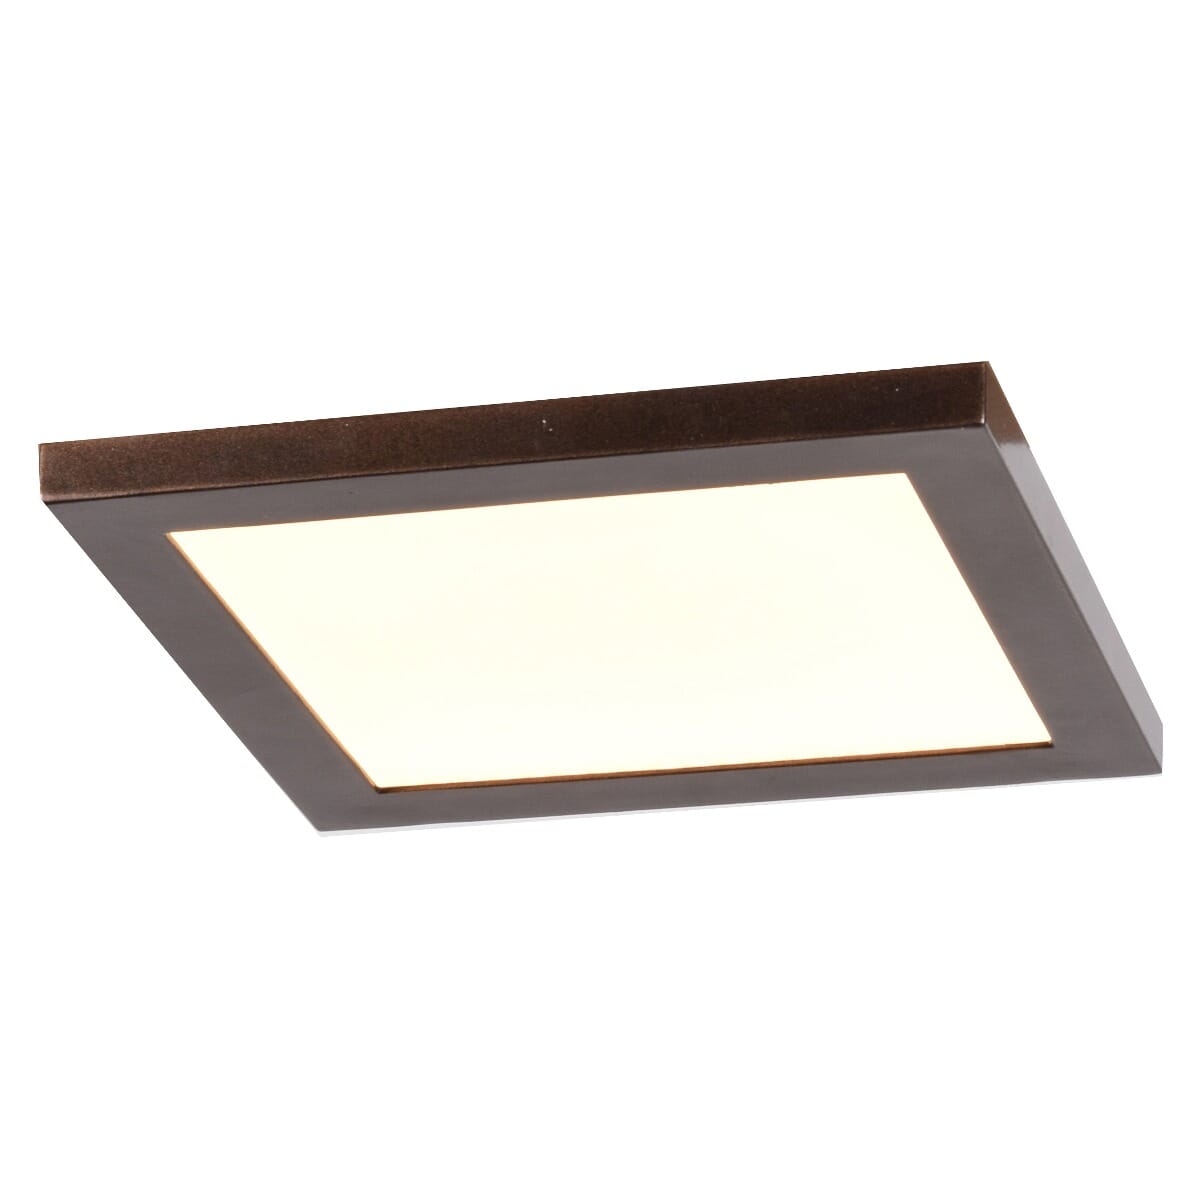 Access Boxer 8" Ceiling Light in Bronze